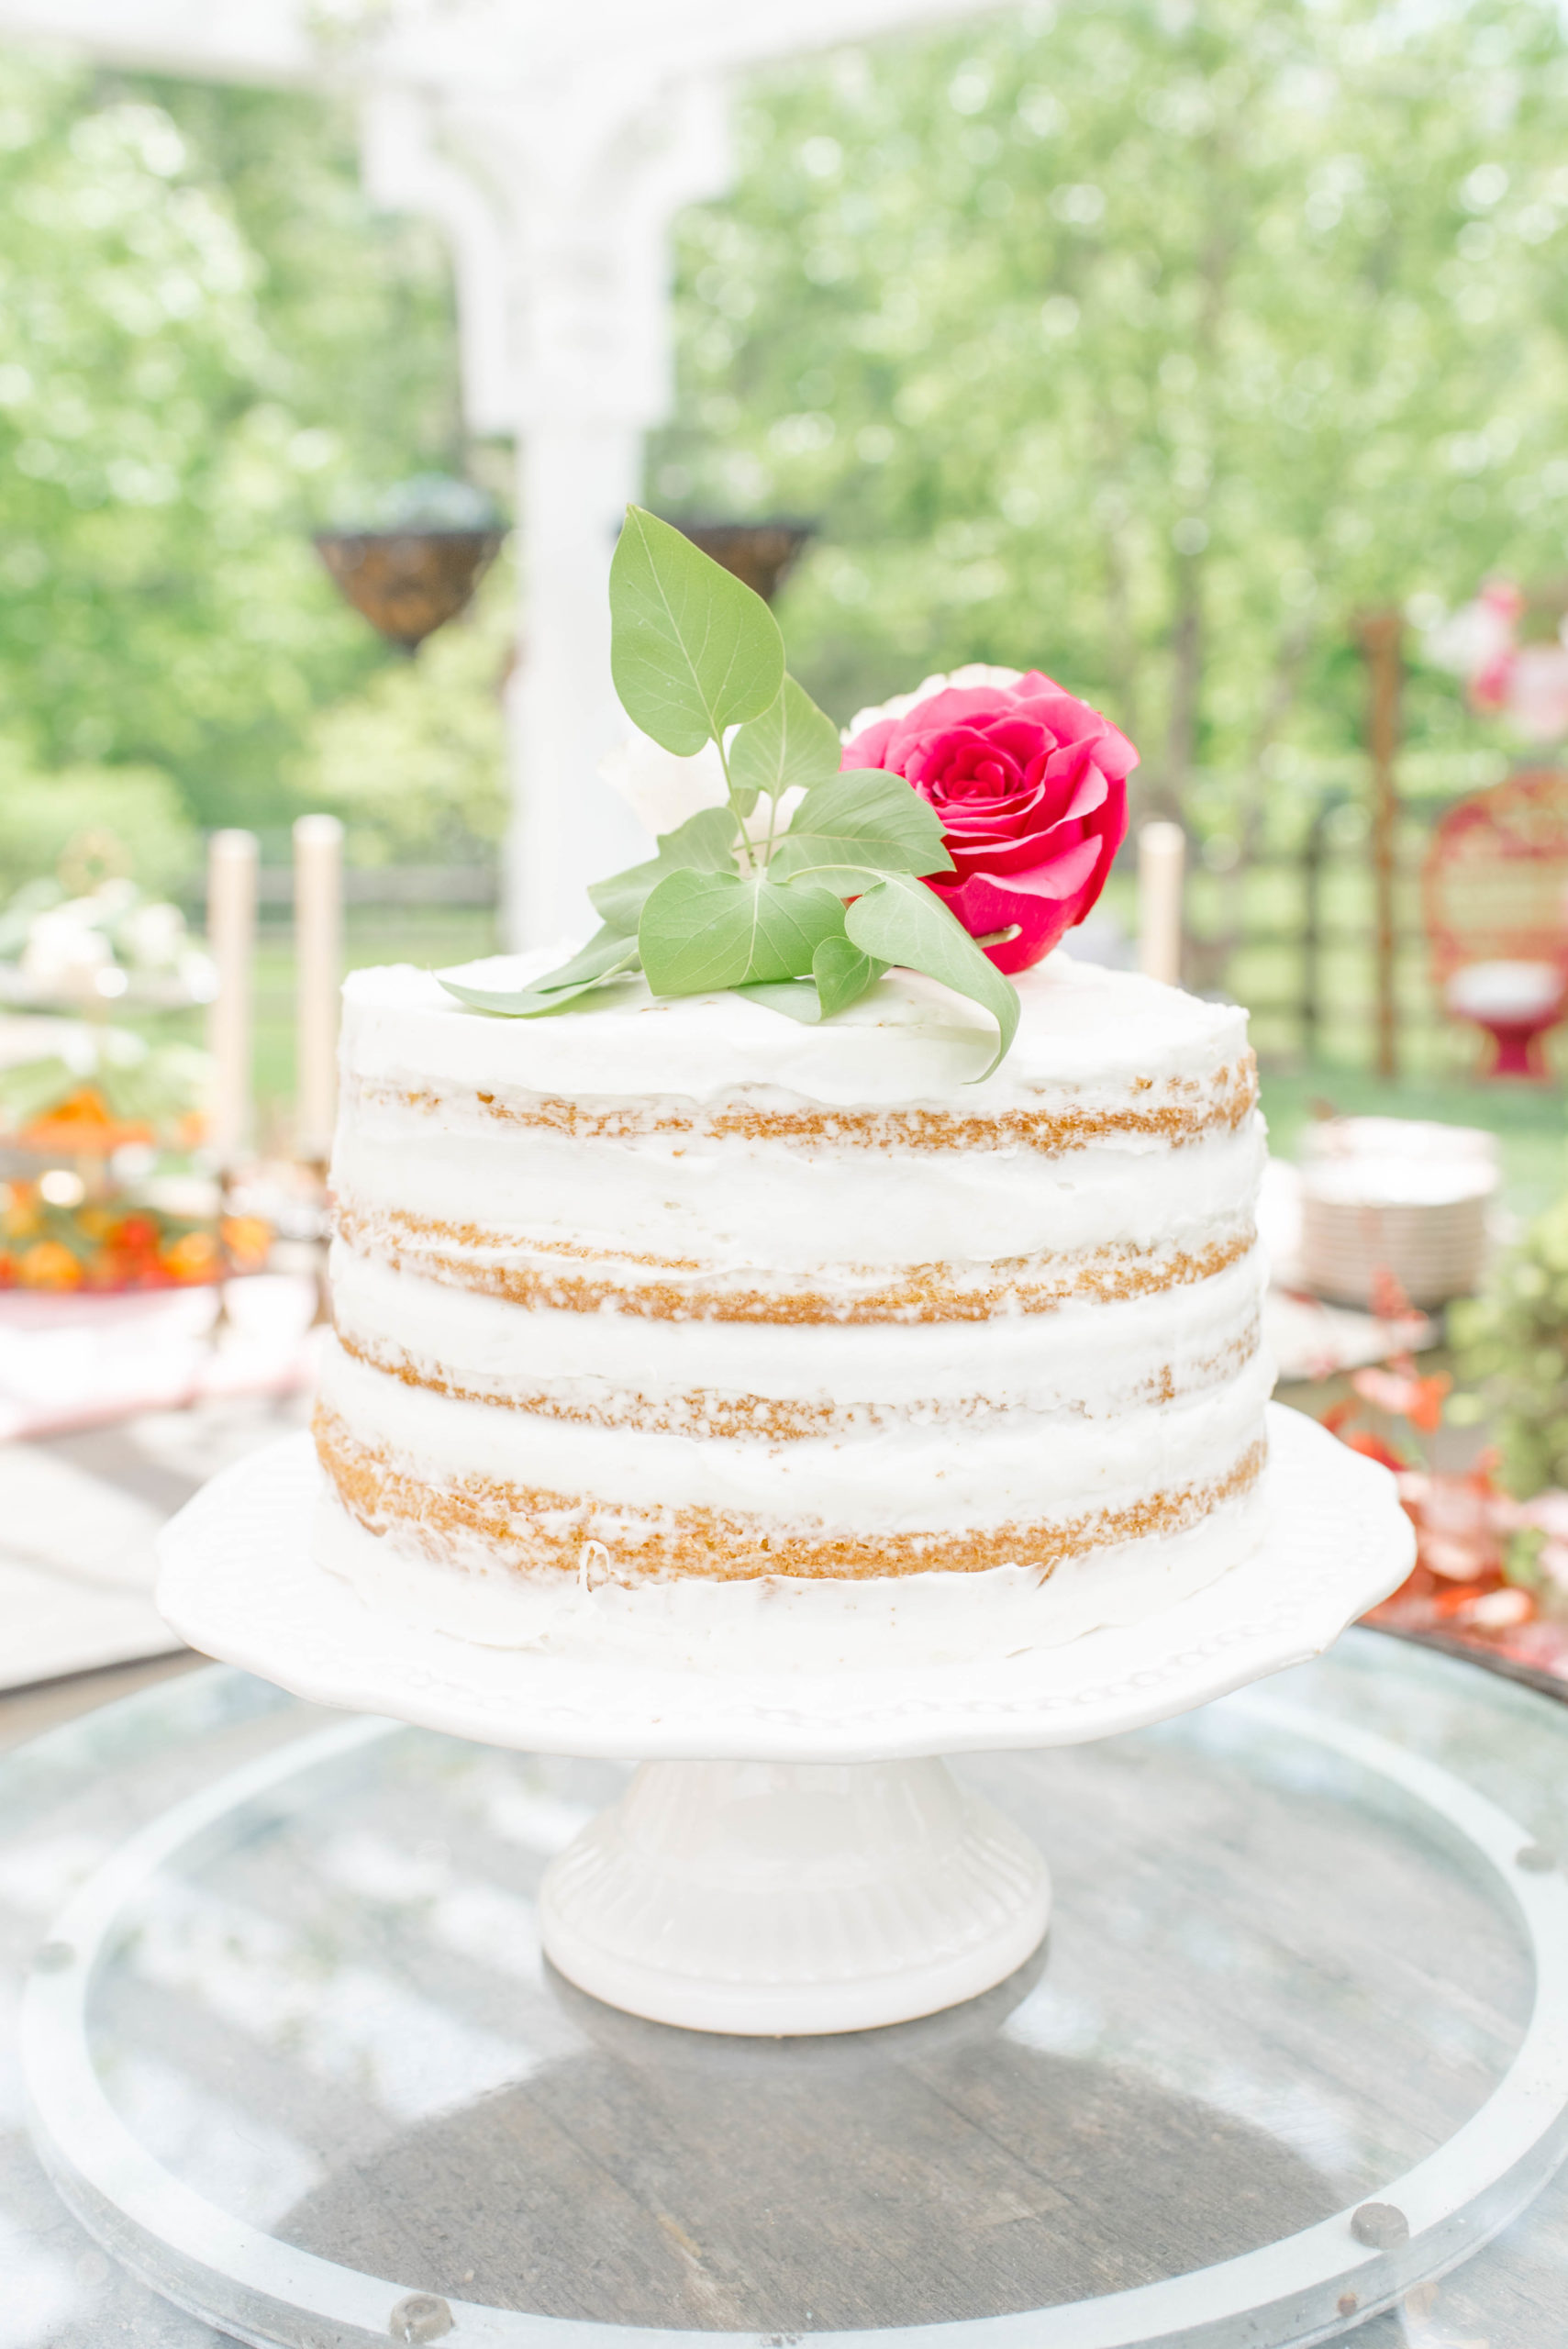 Wedding cake for a styled shoot in Maryland.